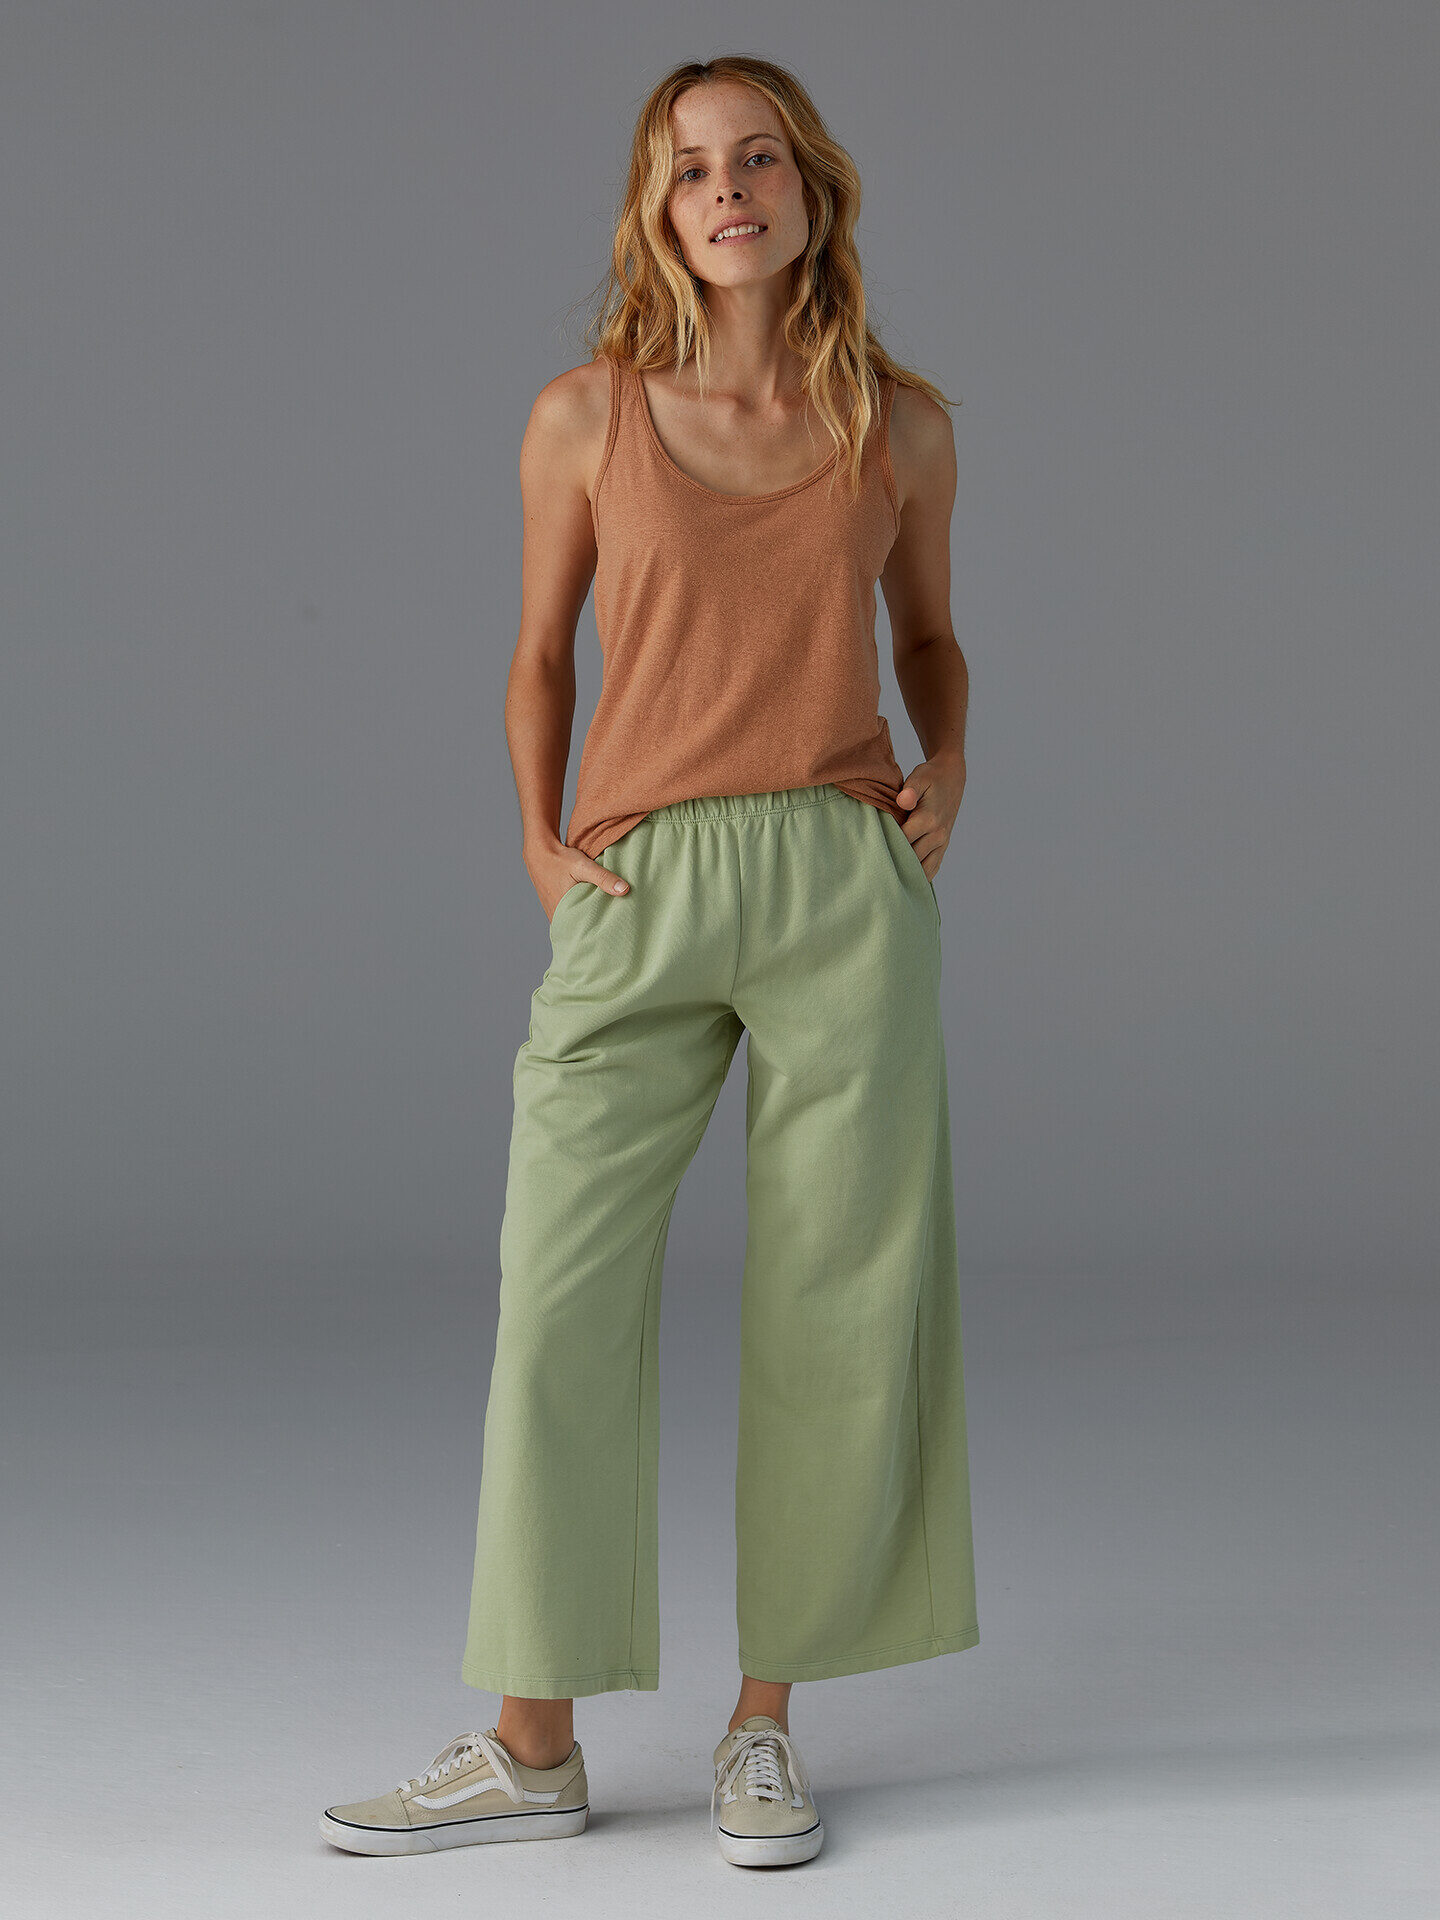 Model in brown tank and sage green wide leg pants and tennis shoes